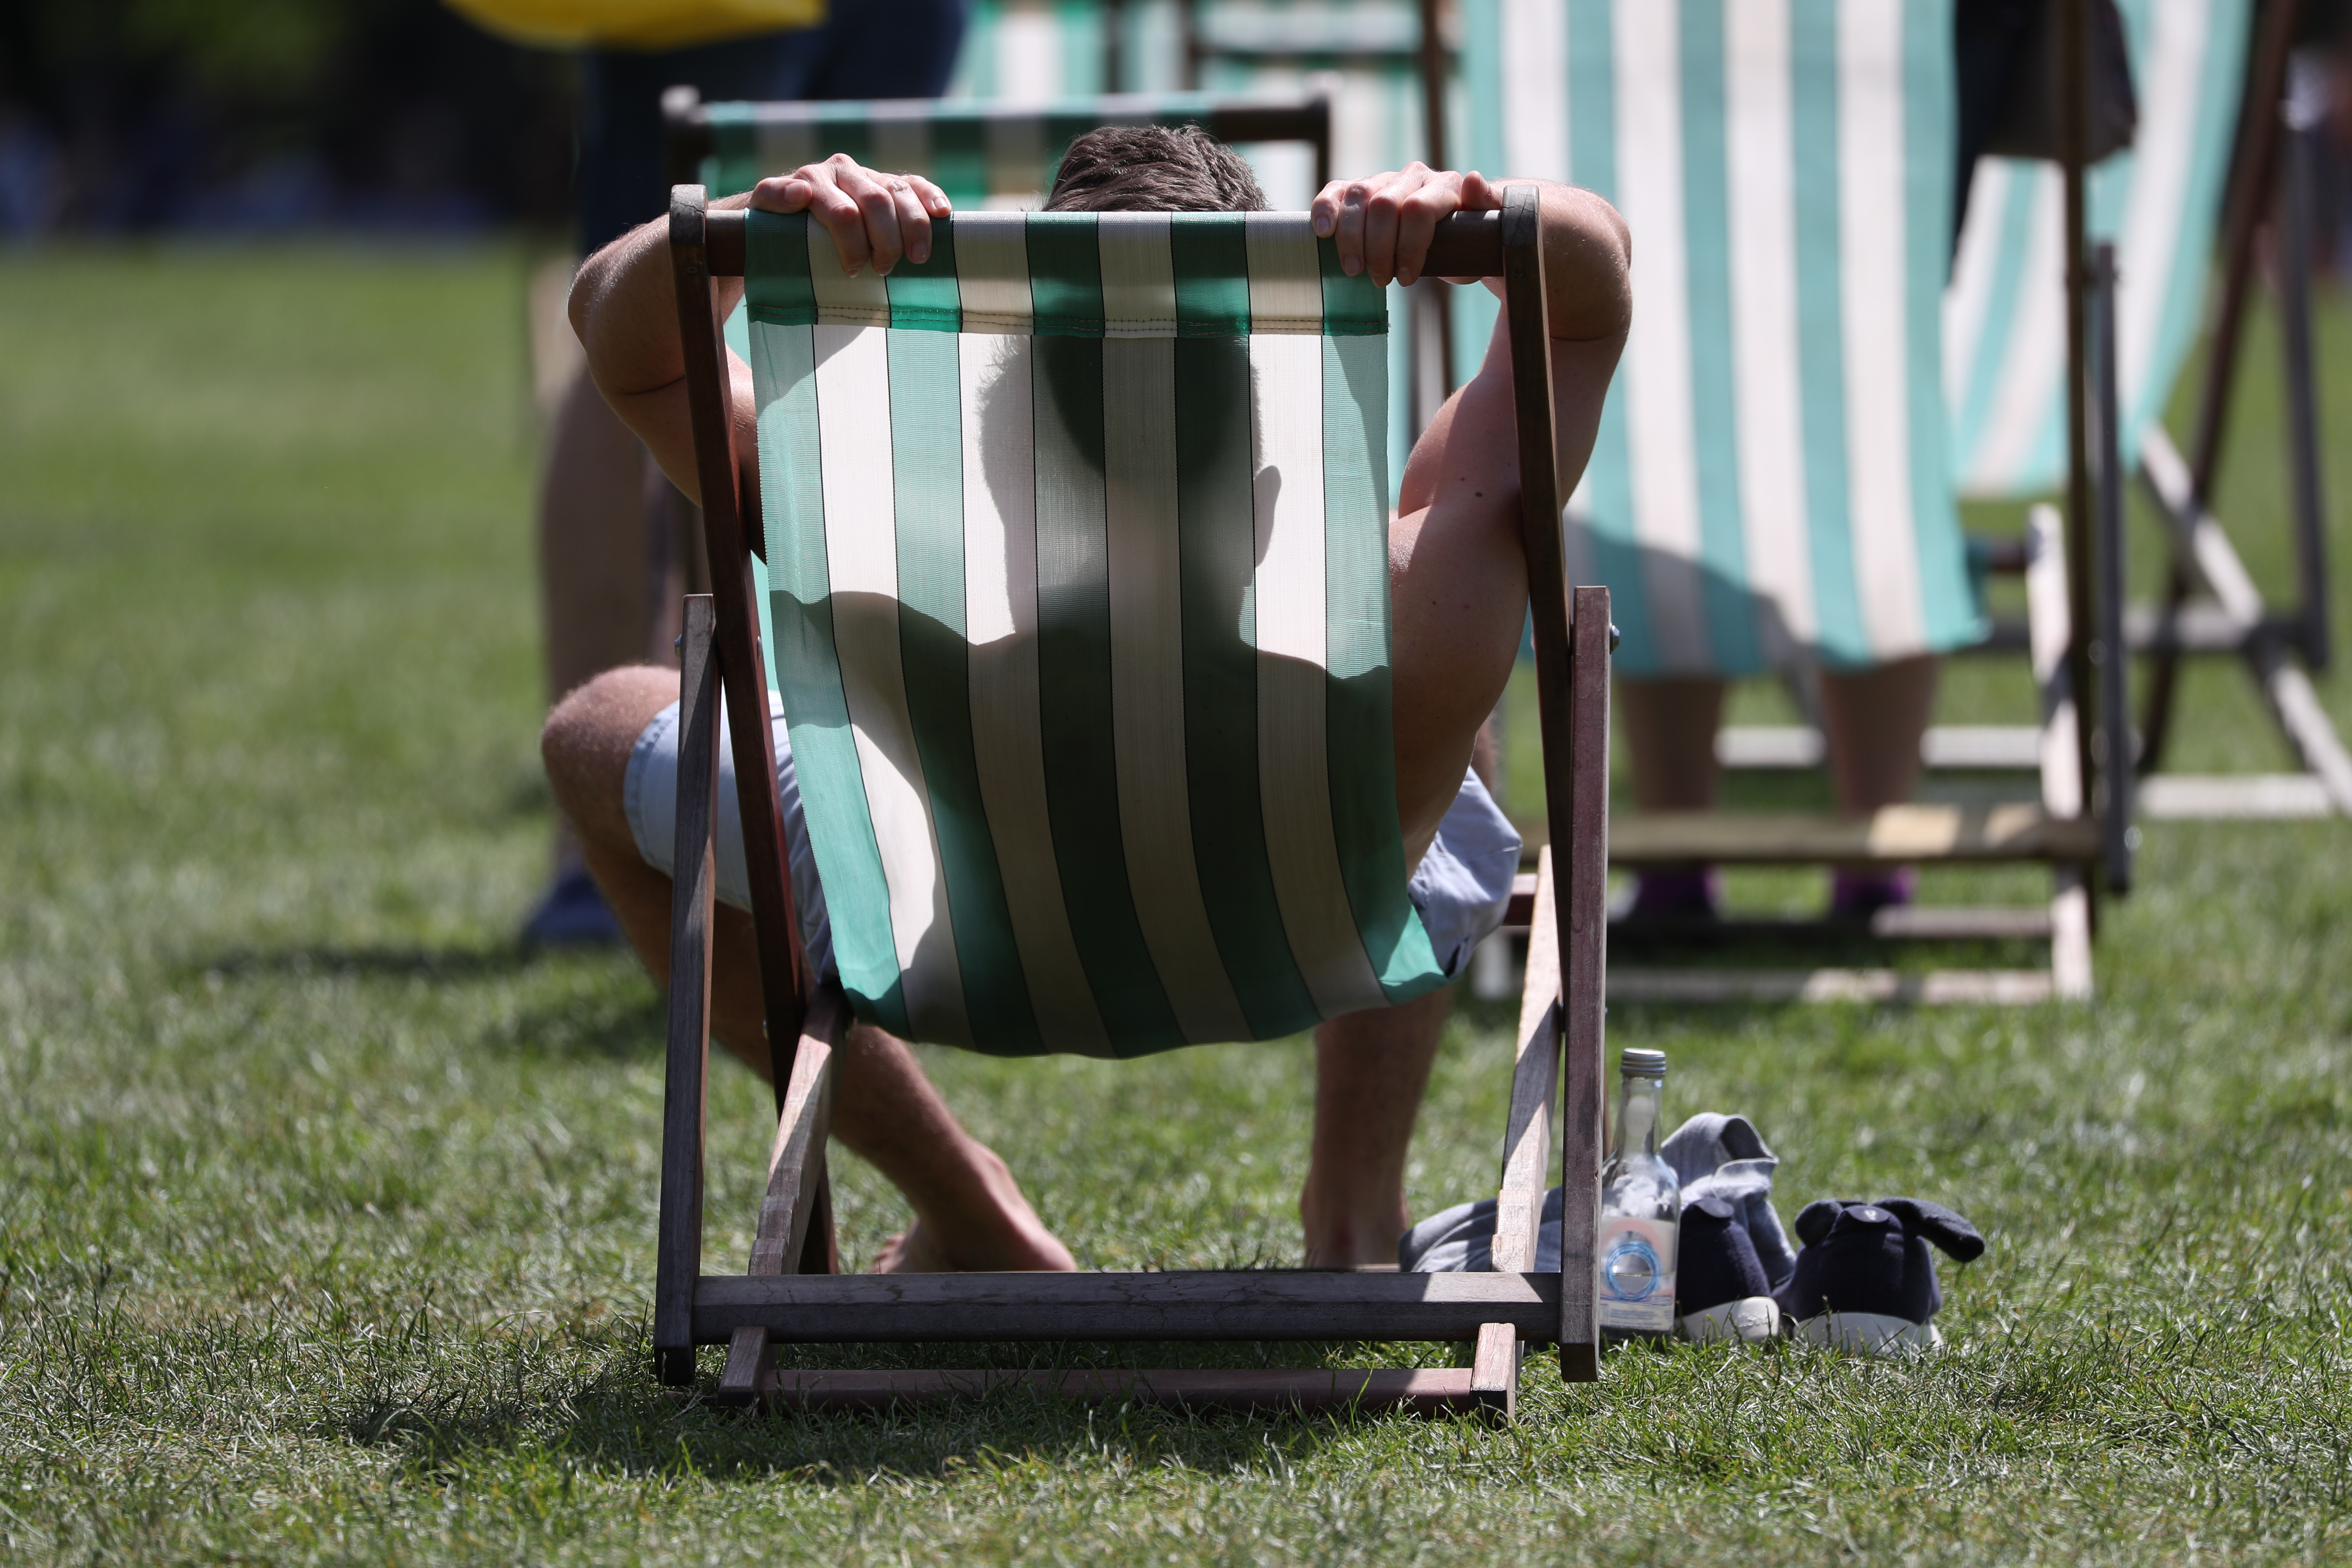 Next year is set to be another of the warmest on record, the Met Office has forecast.